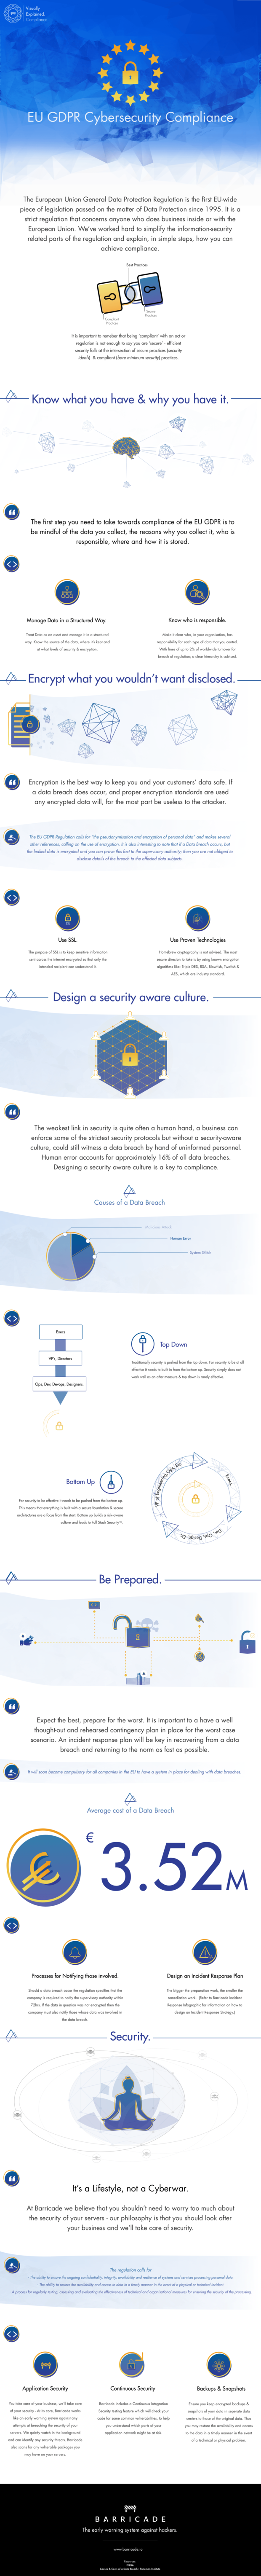 EU General Data Protection Regulation Infographic by barricade